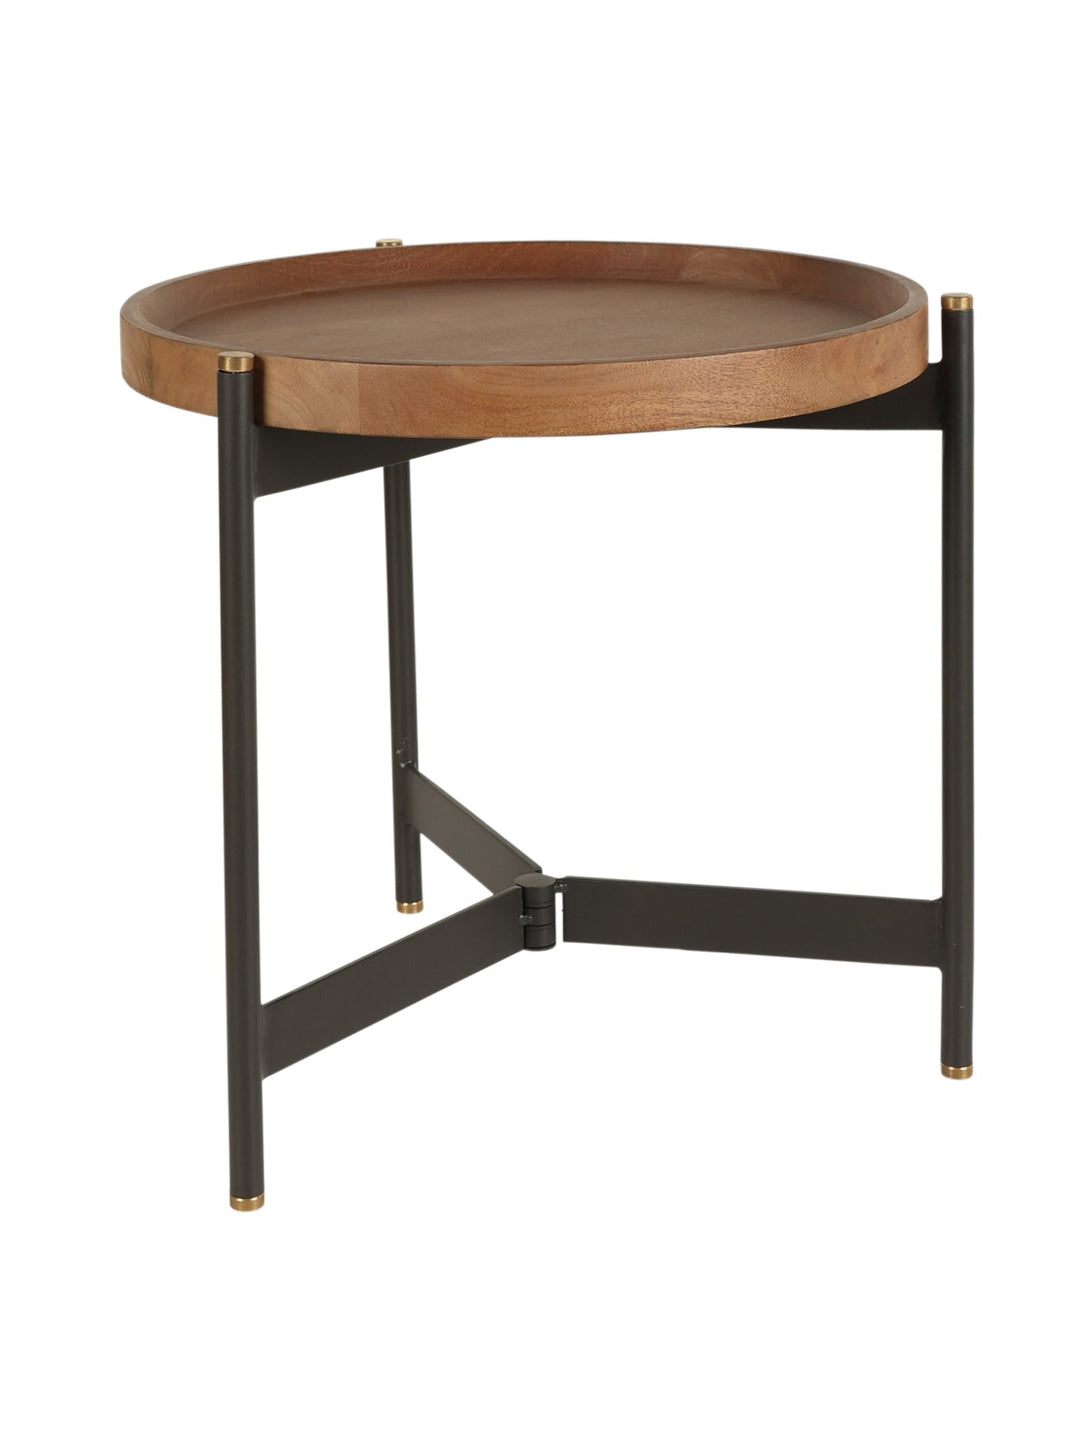 Roundhouse Side Table Set in Nutmeg - side table- Hertex Haus Online - Furniture